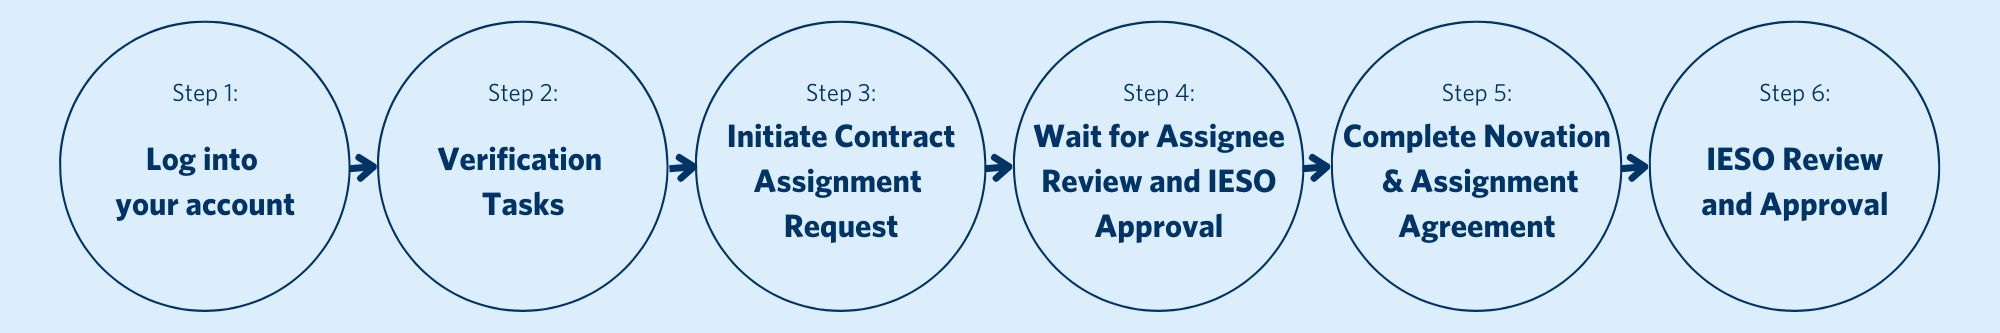 Step1: log into account, step 2: verification tasks, step 3: initiate contract assignment request, step 4: wait for assignee review and ieso approval, step 5: complete novation and assignment agreement, step 6: ieso review and approval